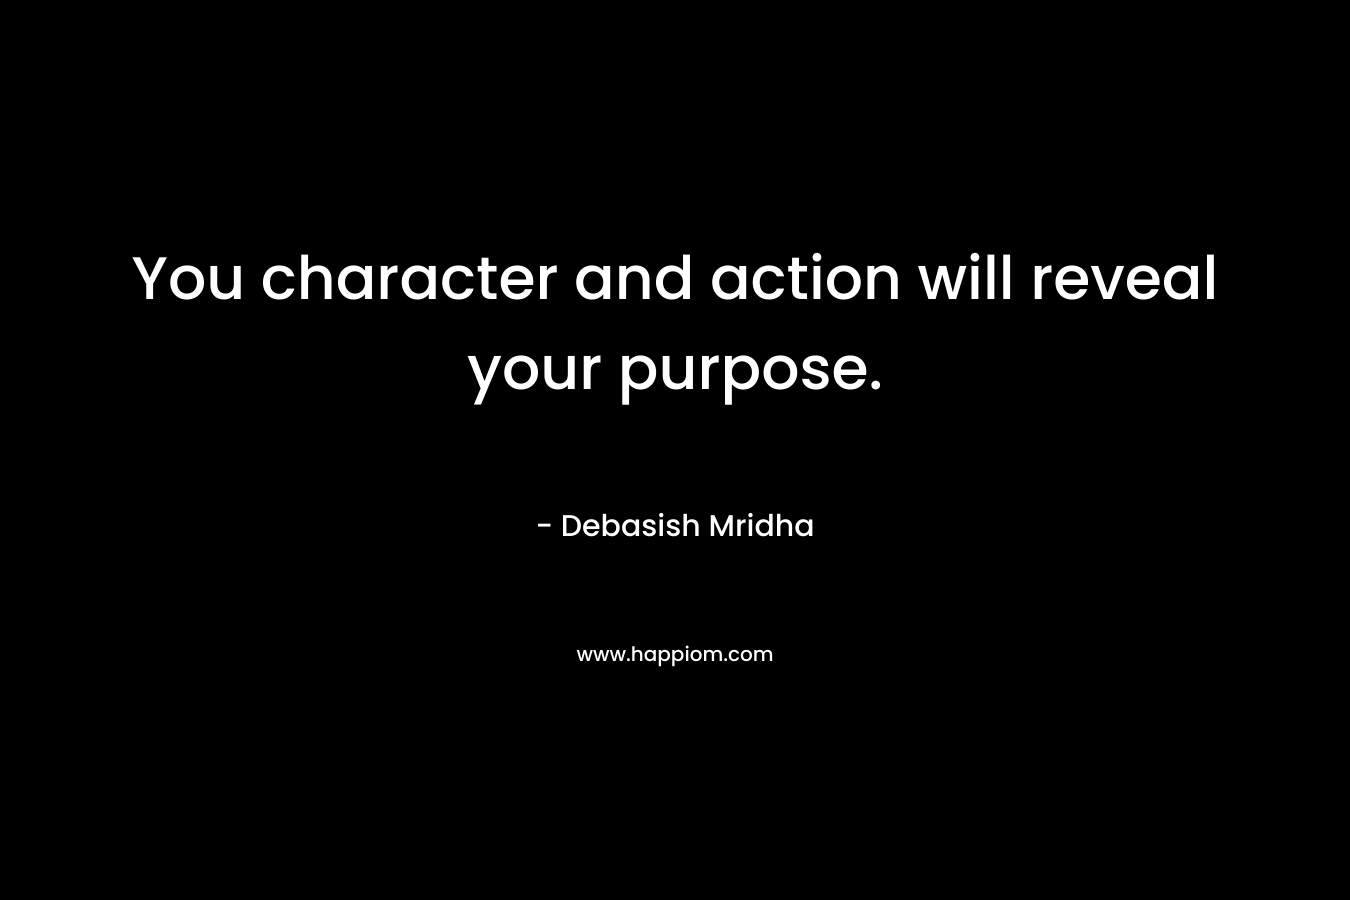 You character and action will reveal your purpose.